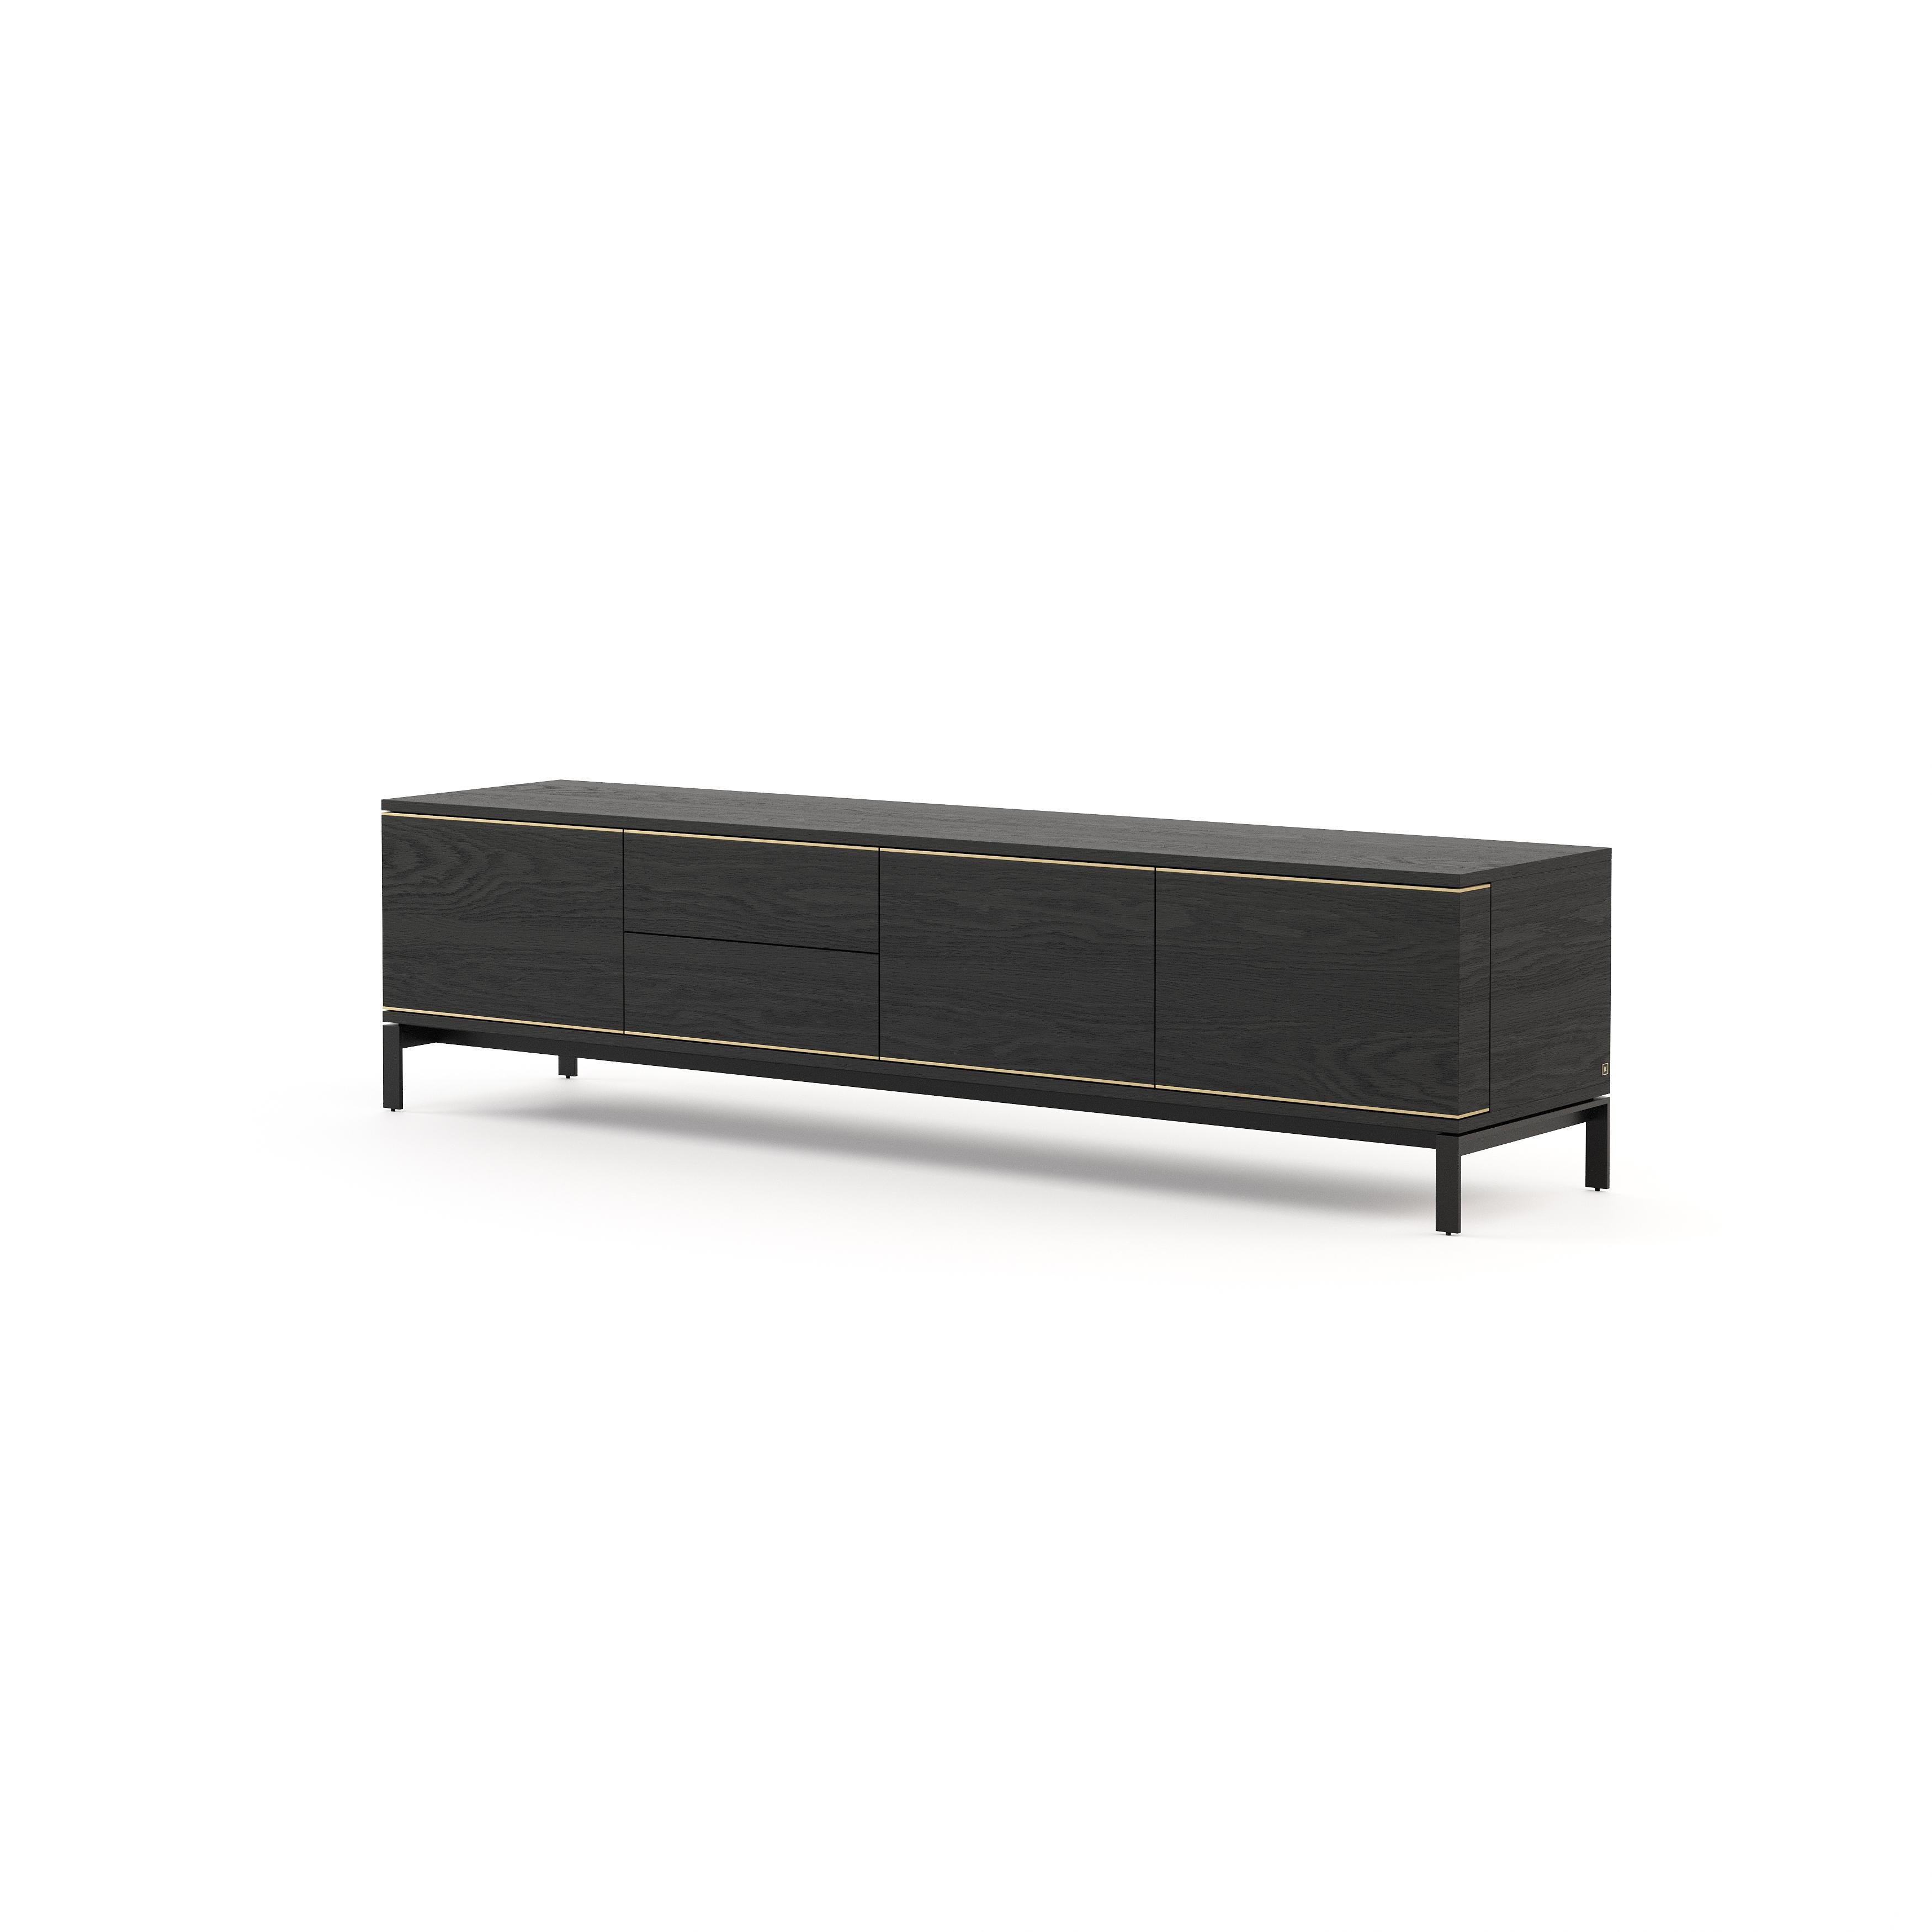 Enchanting with its simple elegance, Dener TV cabinet is a real feature piece that will look right at home. This TV unit mixes sharp lines and bold feelings, checking every living room space requirement.

* Available in different finishes.
**